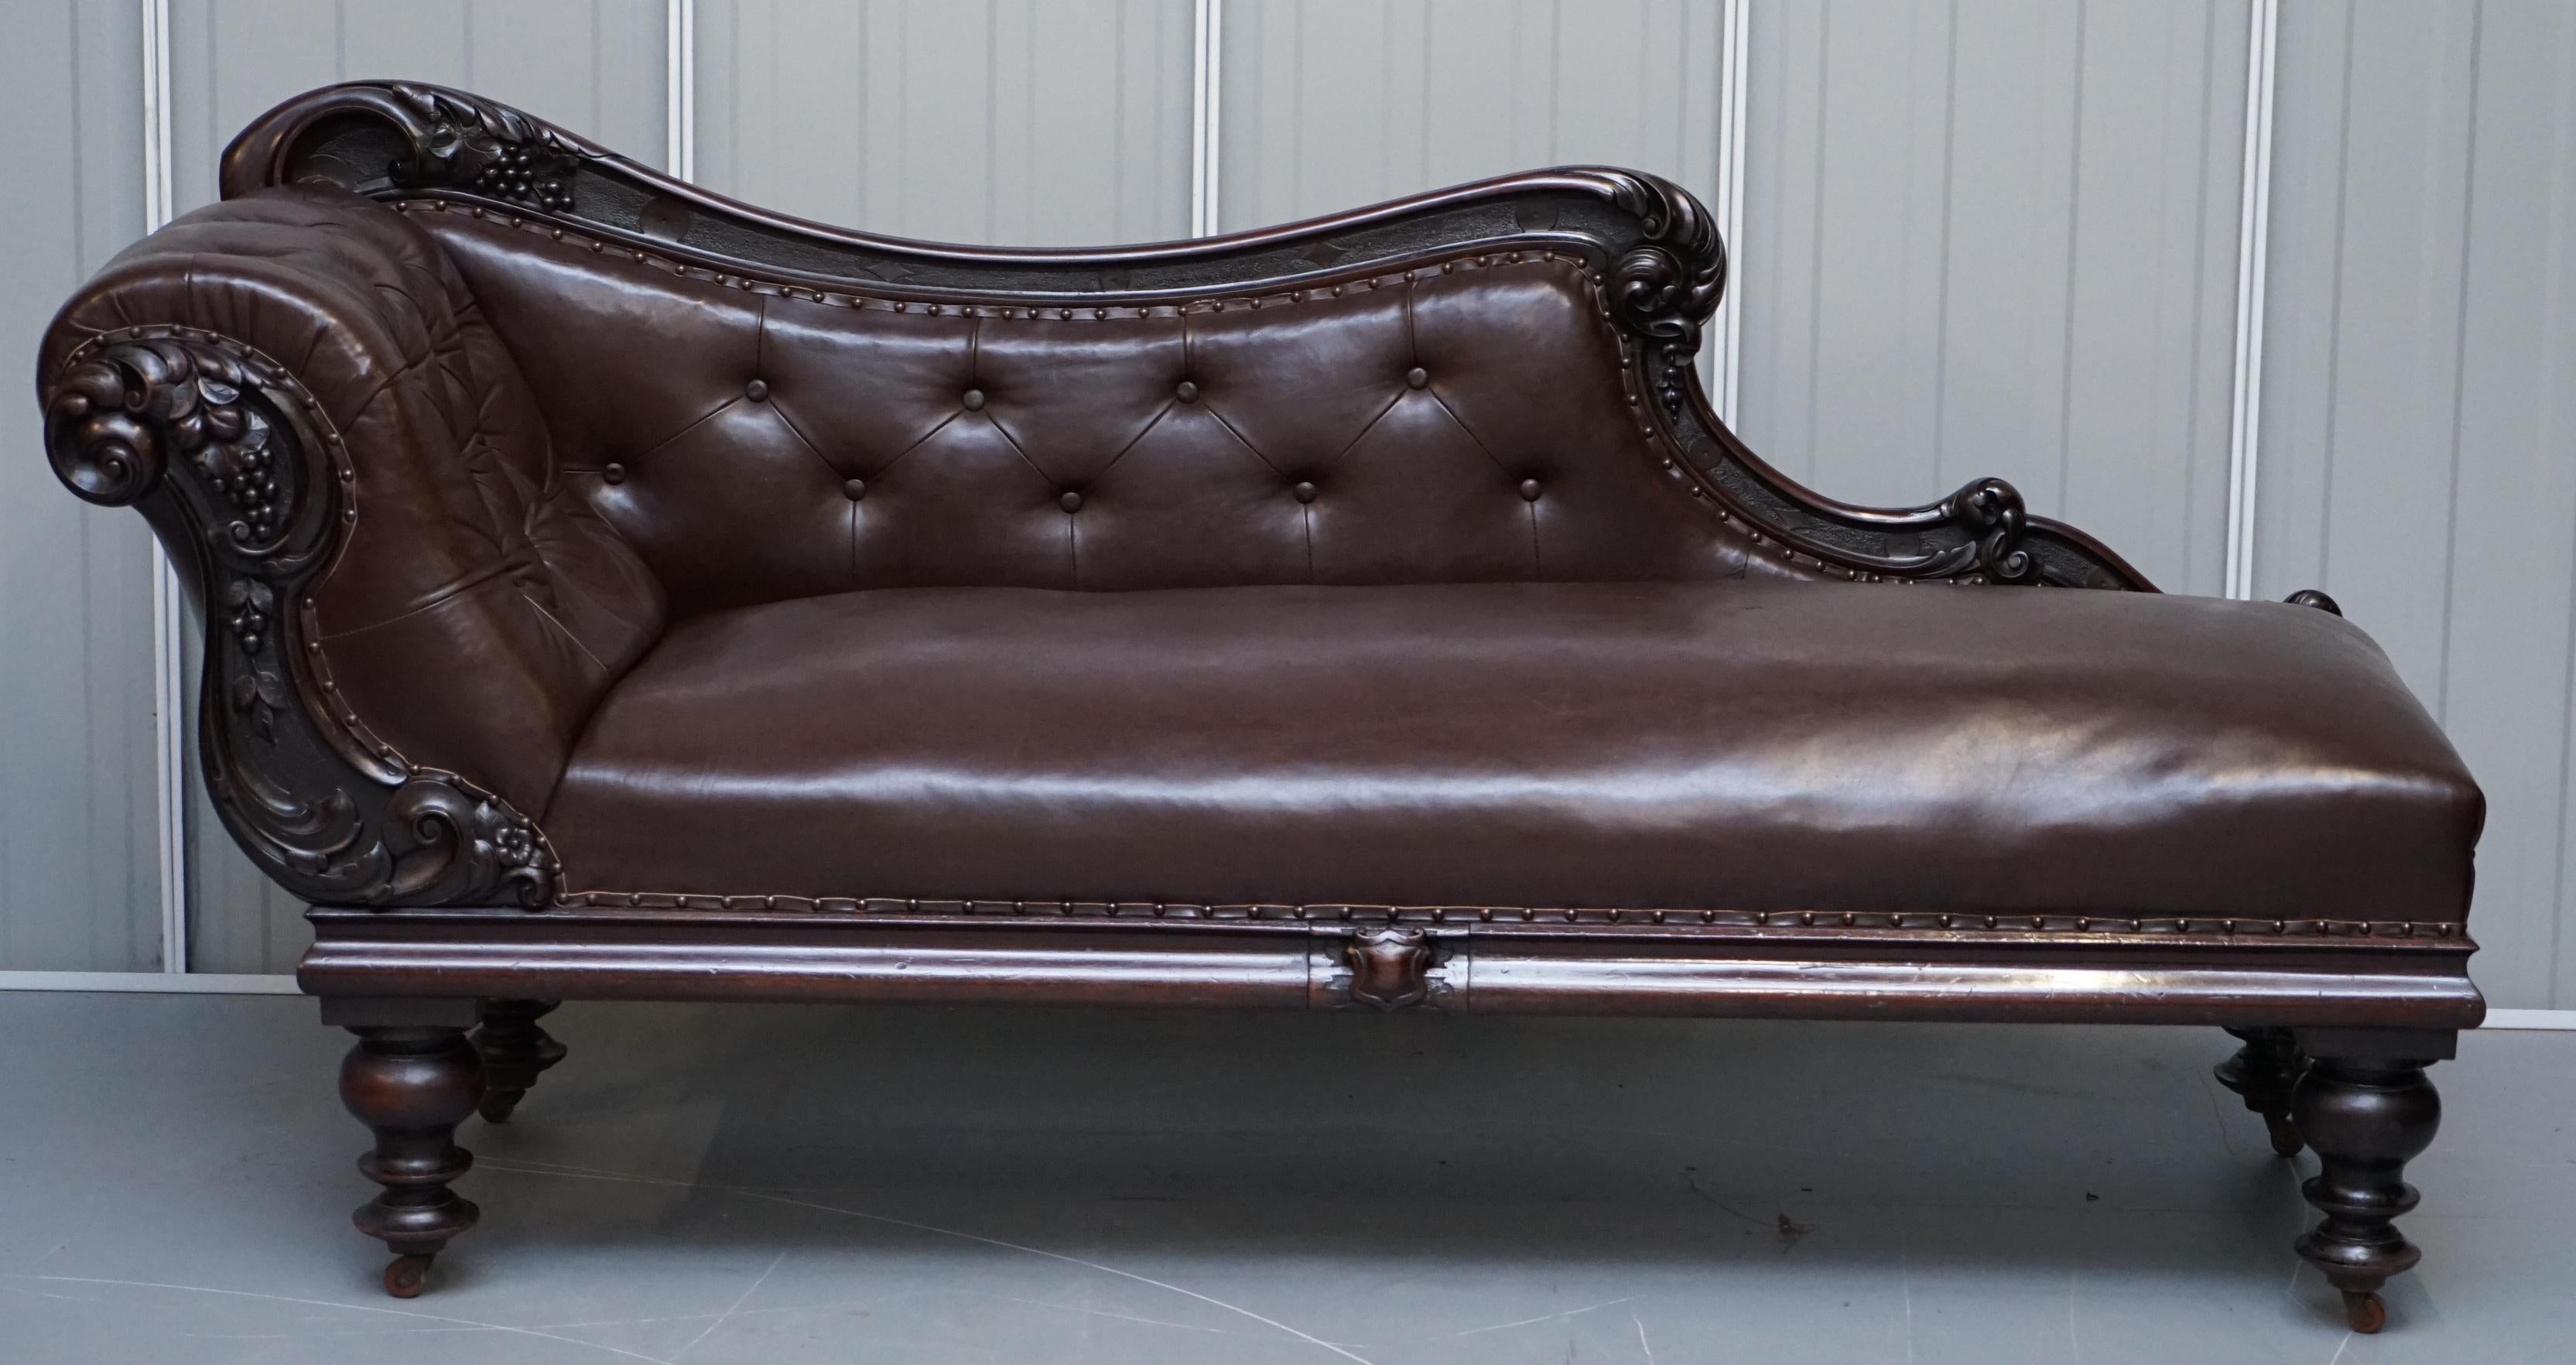 We are delighted to offer for sale this circa 1815 Regency solid mahogany with brown leather upholstery chaise lounge

A good looking and well made chaise with nicely carved solid mahogany frame with floral detailing. The brown leather upholstery